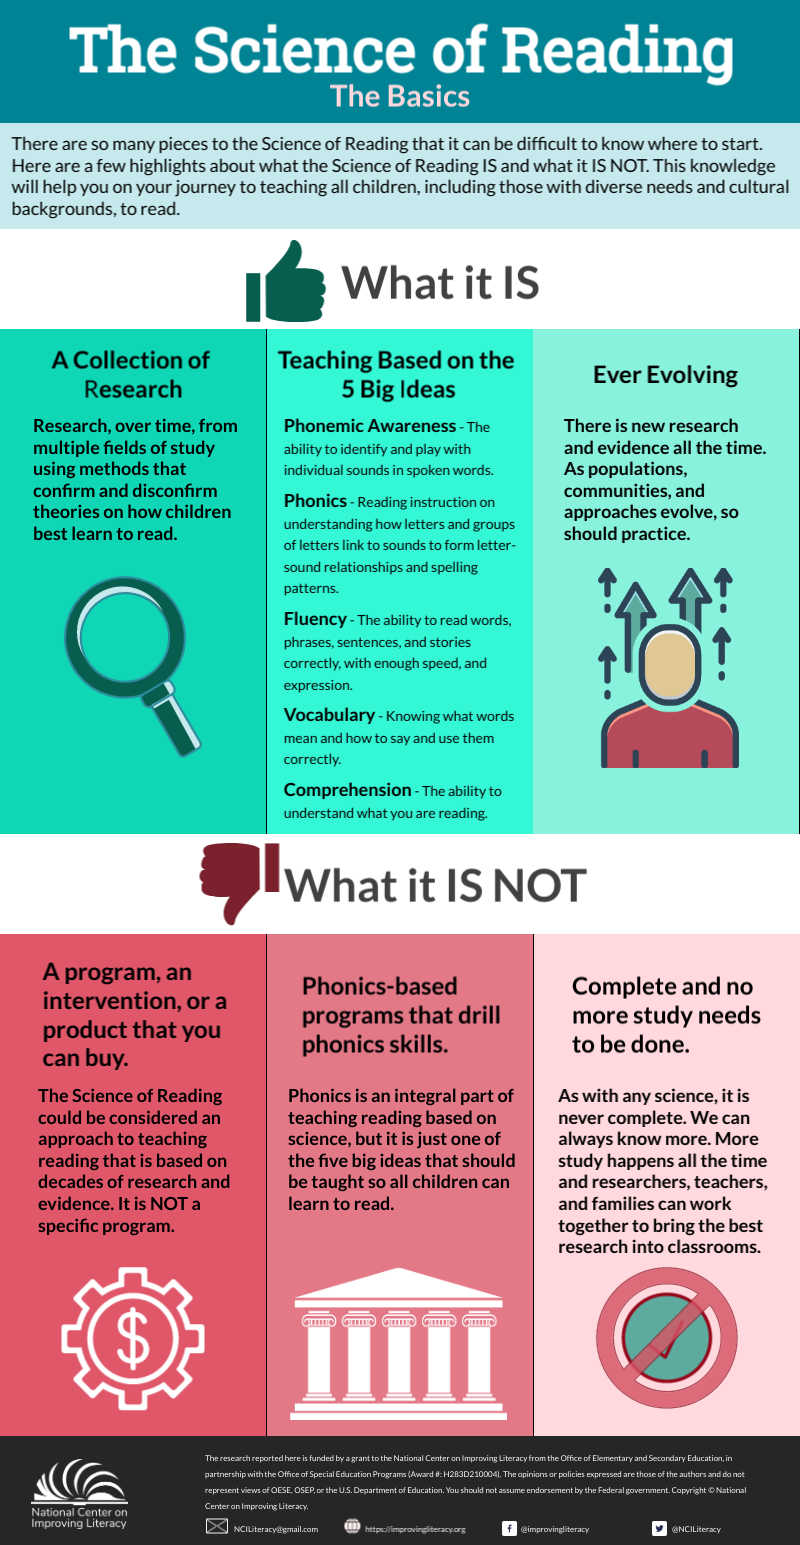 The Science of Reading Info graphic